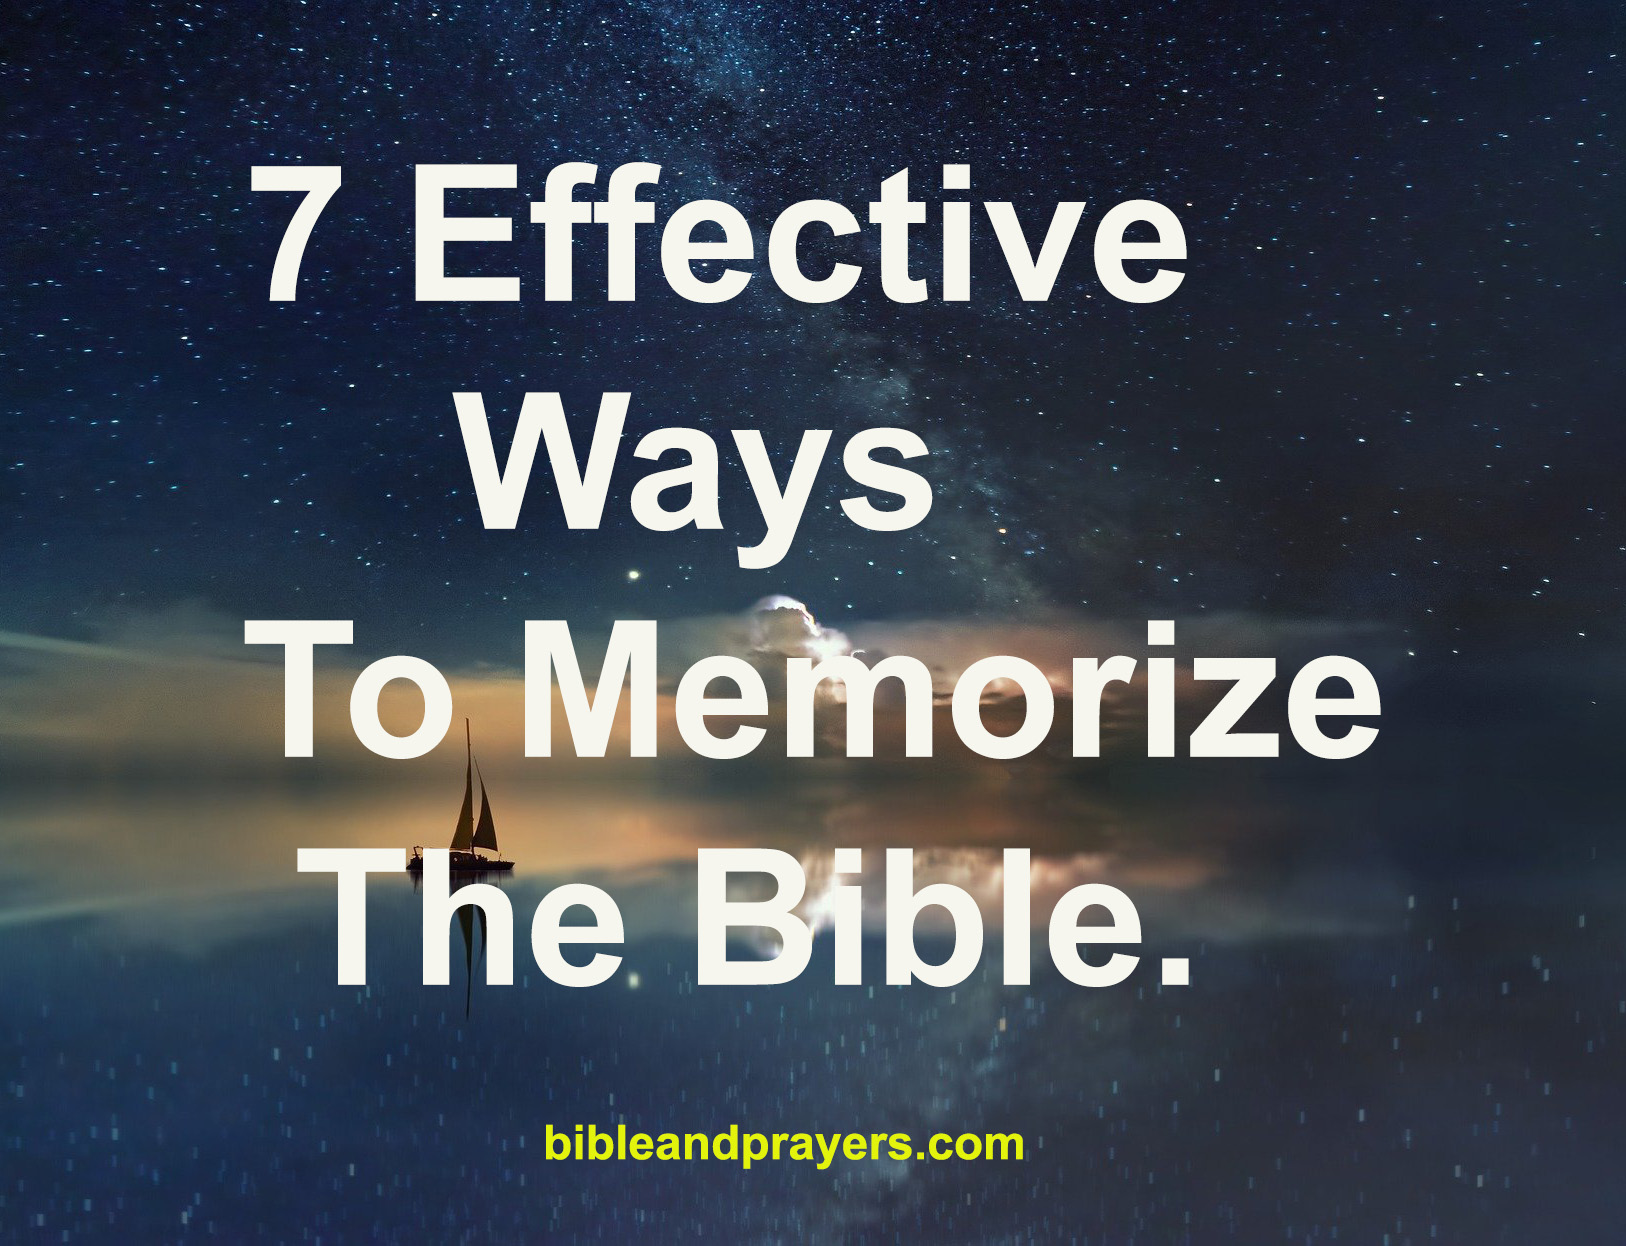 7 Effective Ways To Memorize The Bible.